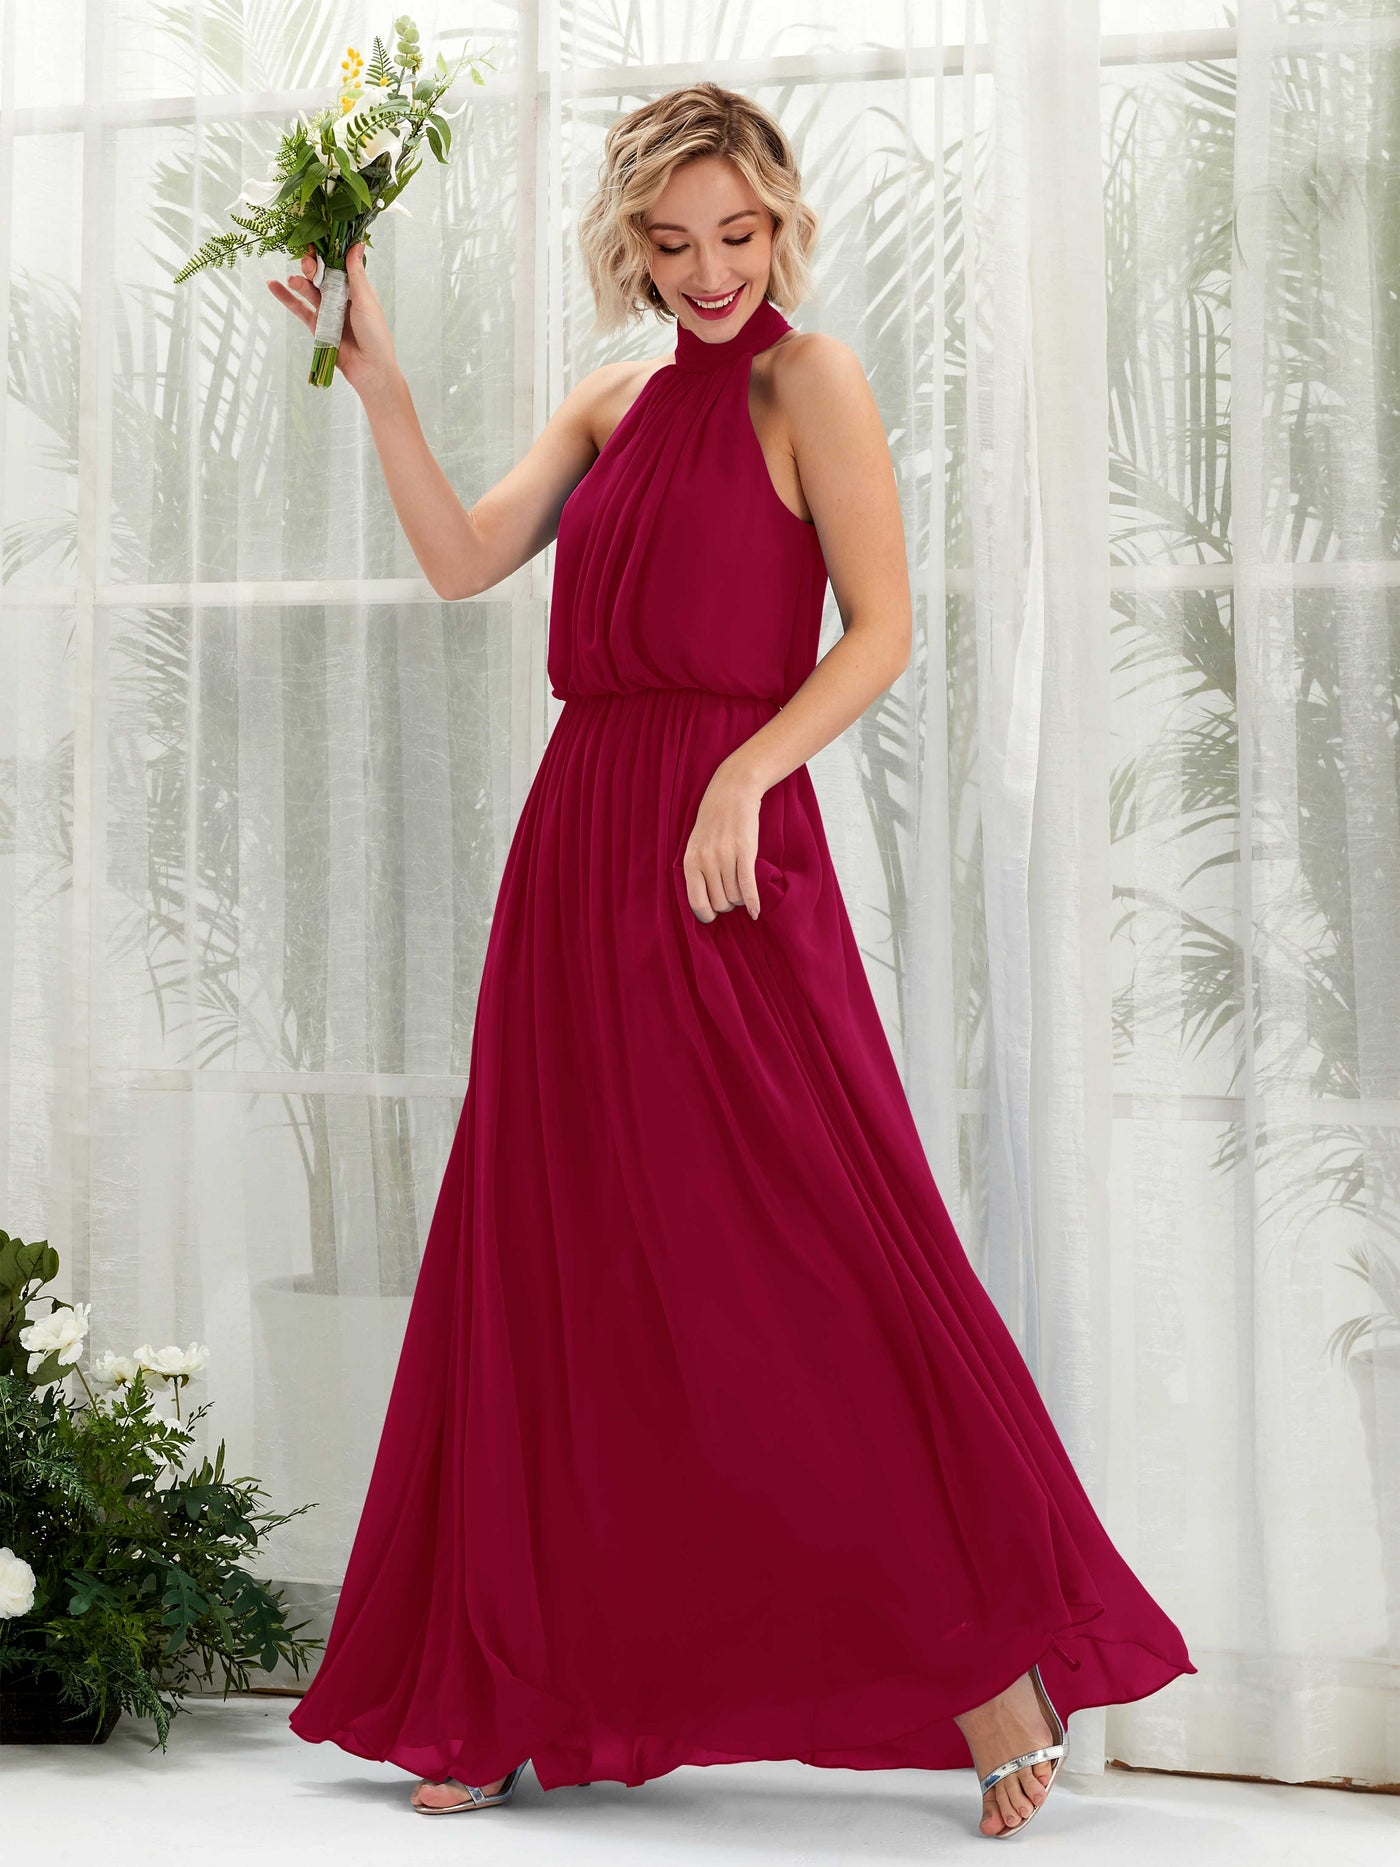 Jester Red Bridesmaid Dresses Bridesmaid Dress A-line Chiffon Halter Full Length Sleeveless Wedding Party Dress (81222941)#color_jester-red